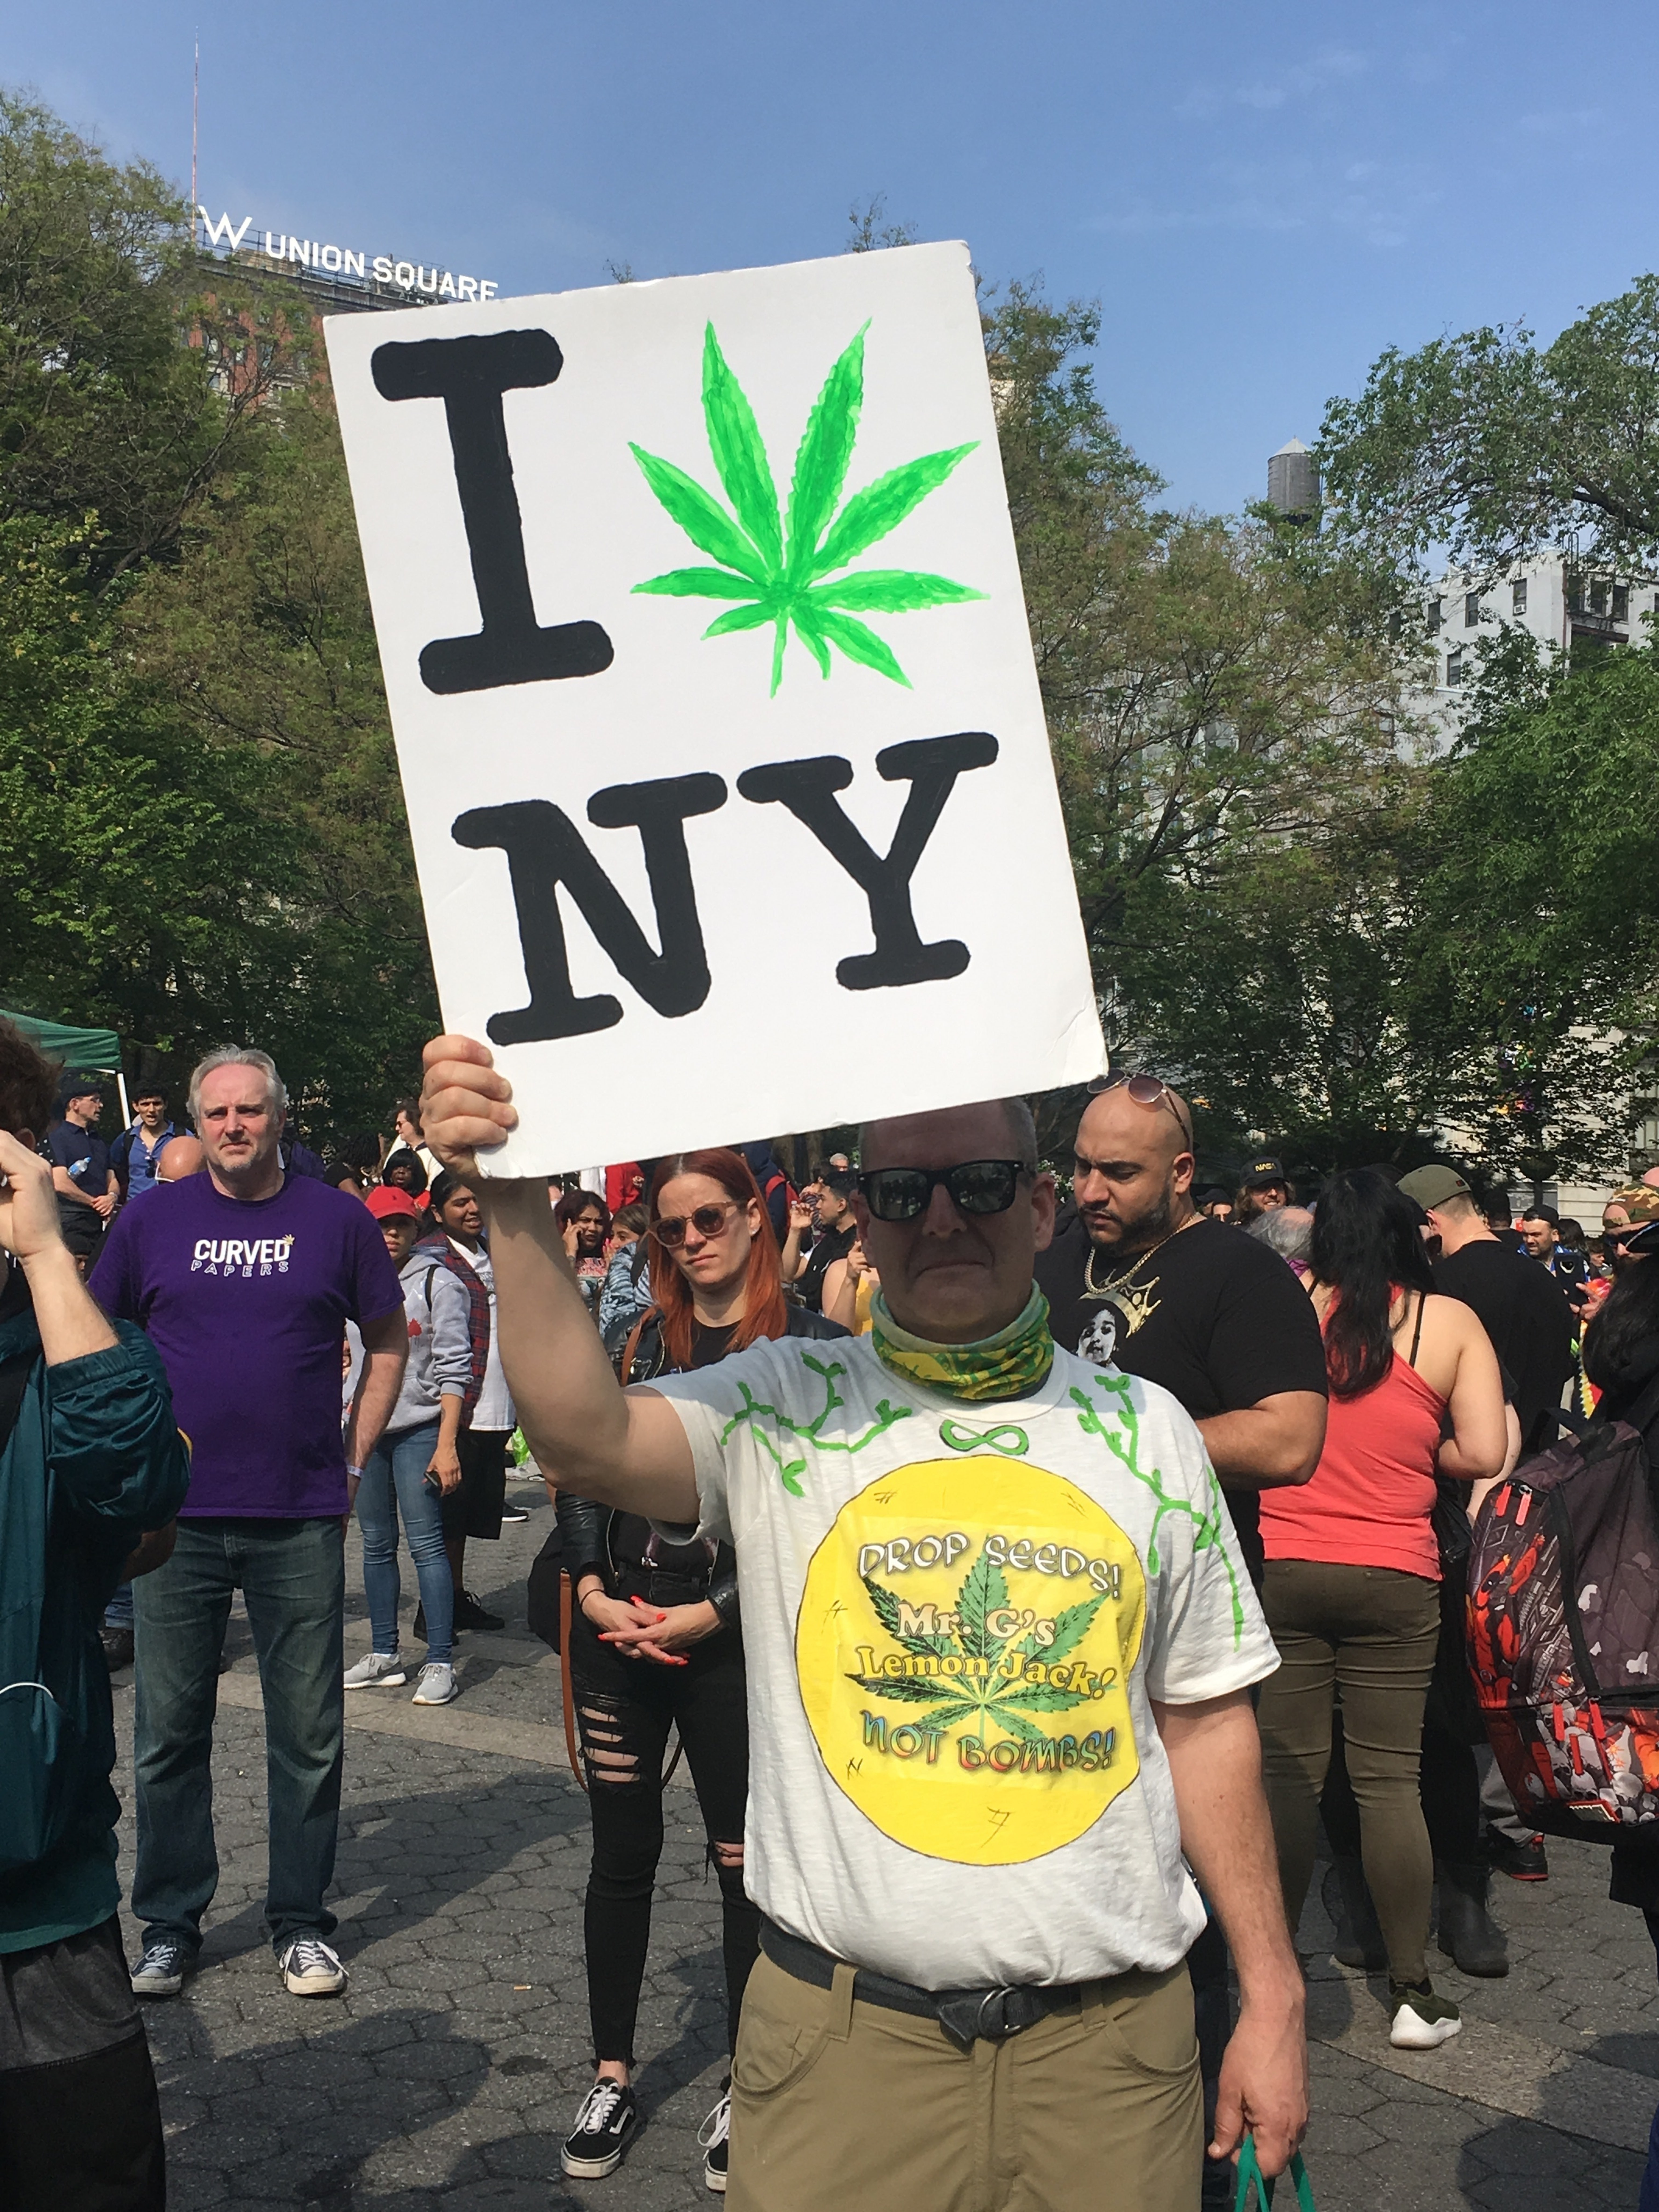 New York&#39;s First Legal Cannabis Dispensaries Coming Soon, Red Tape Getting Shorter